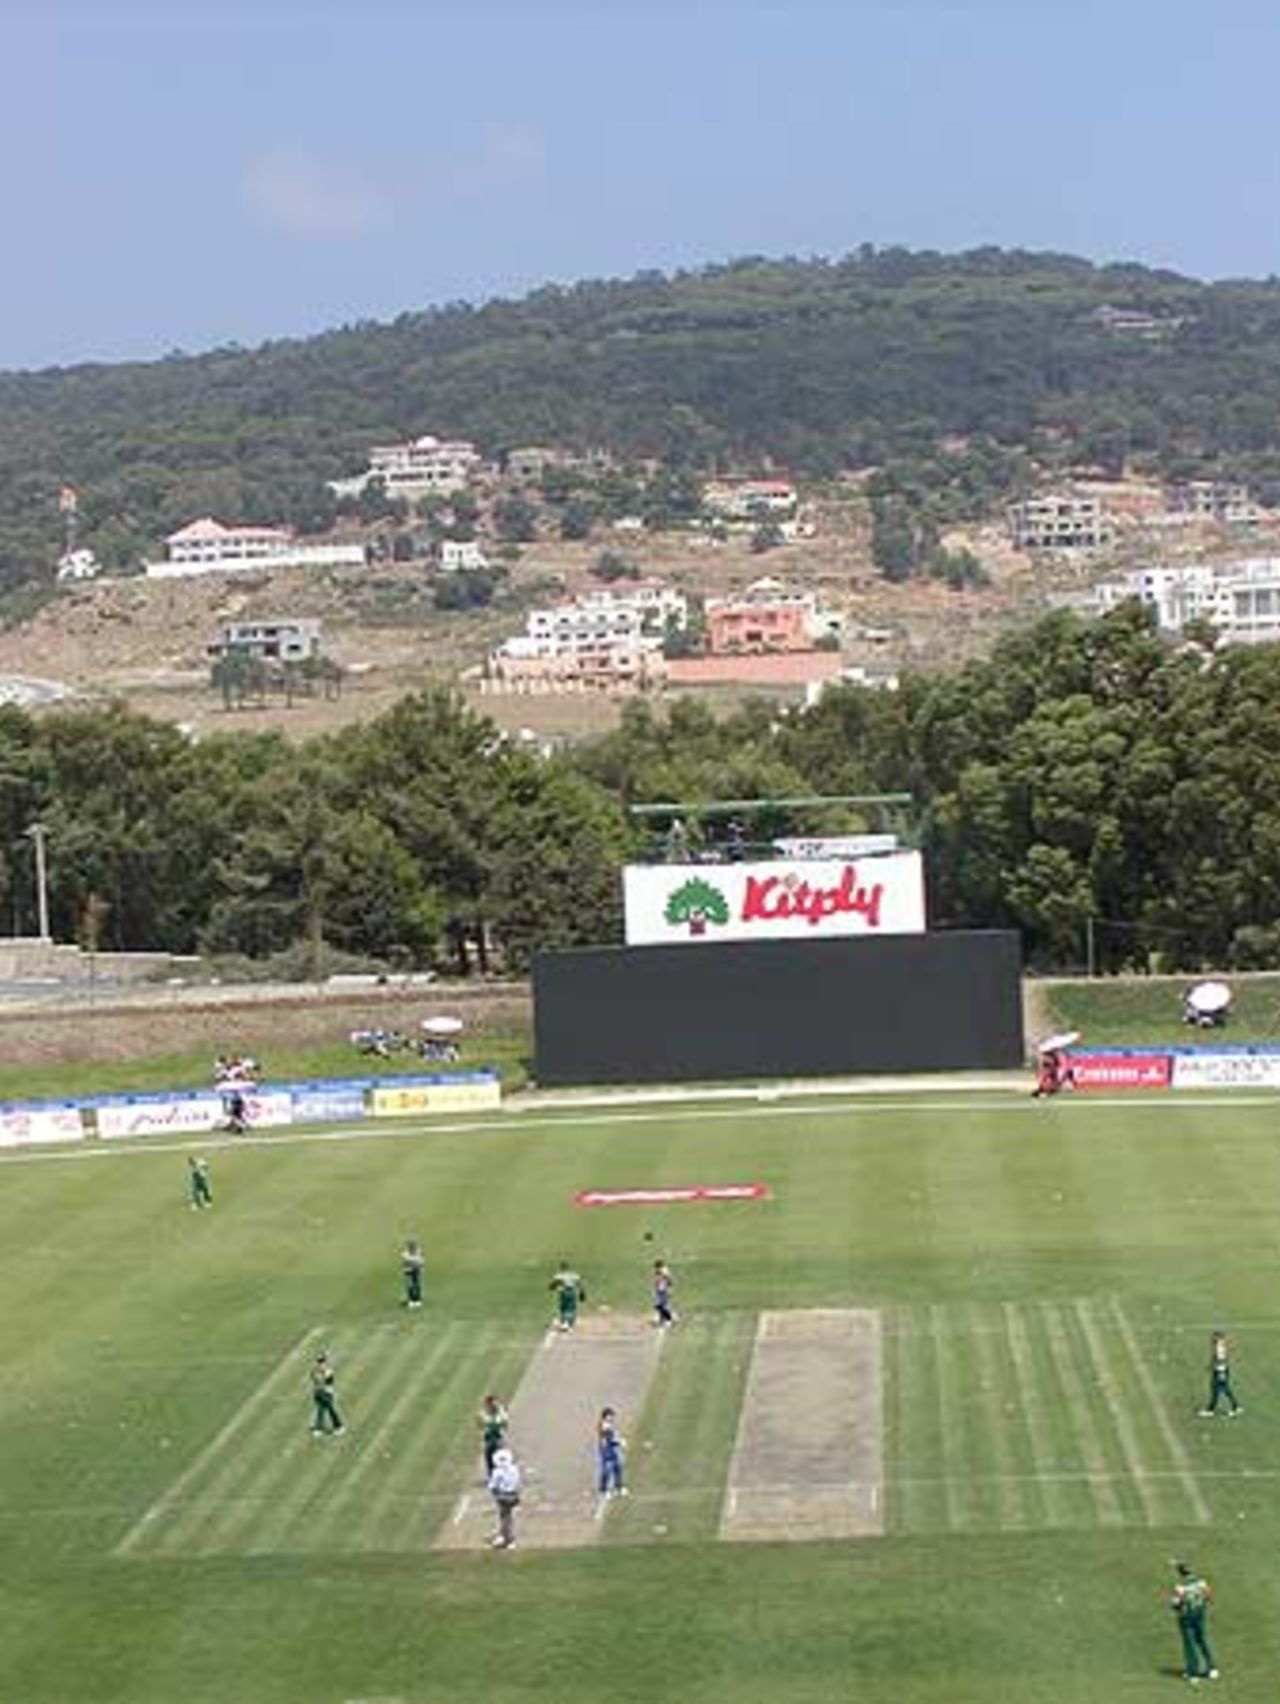 Another view of the National Cricket Stadium, Tangier, Morocco Cup, 3rd ODI at Tangiers, South Africa v Sri Lanka, 15 Aug 2002